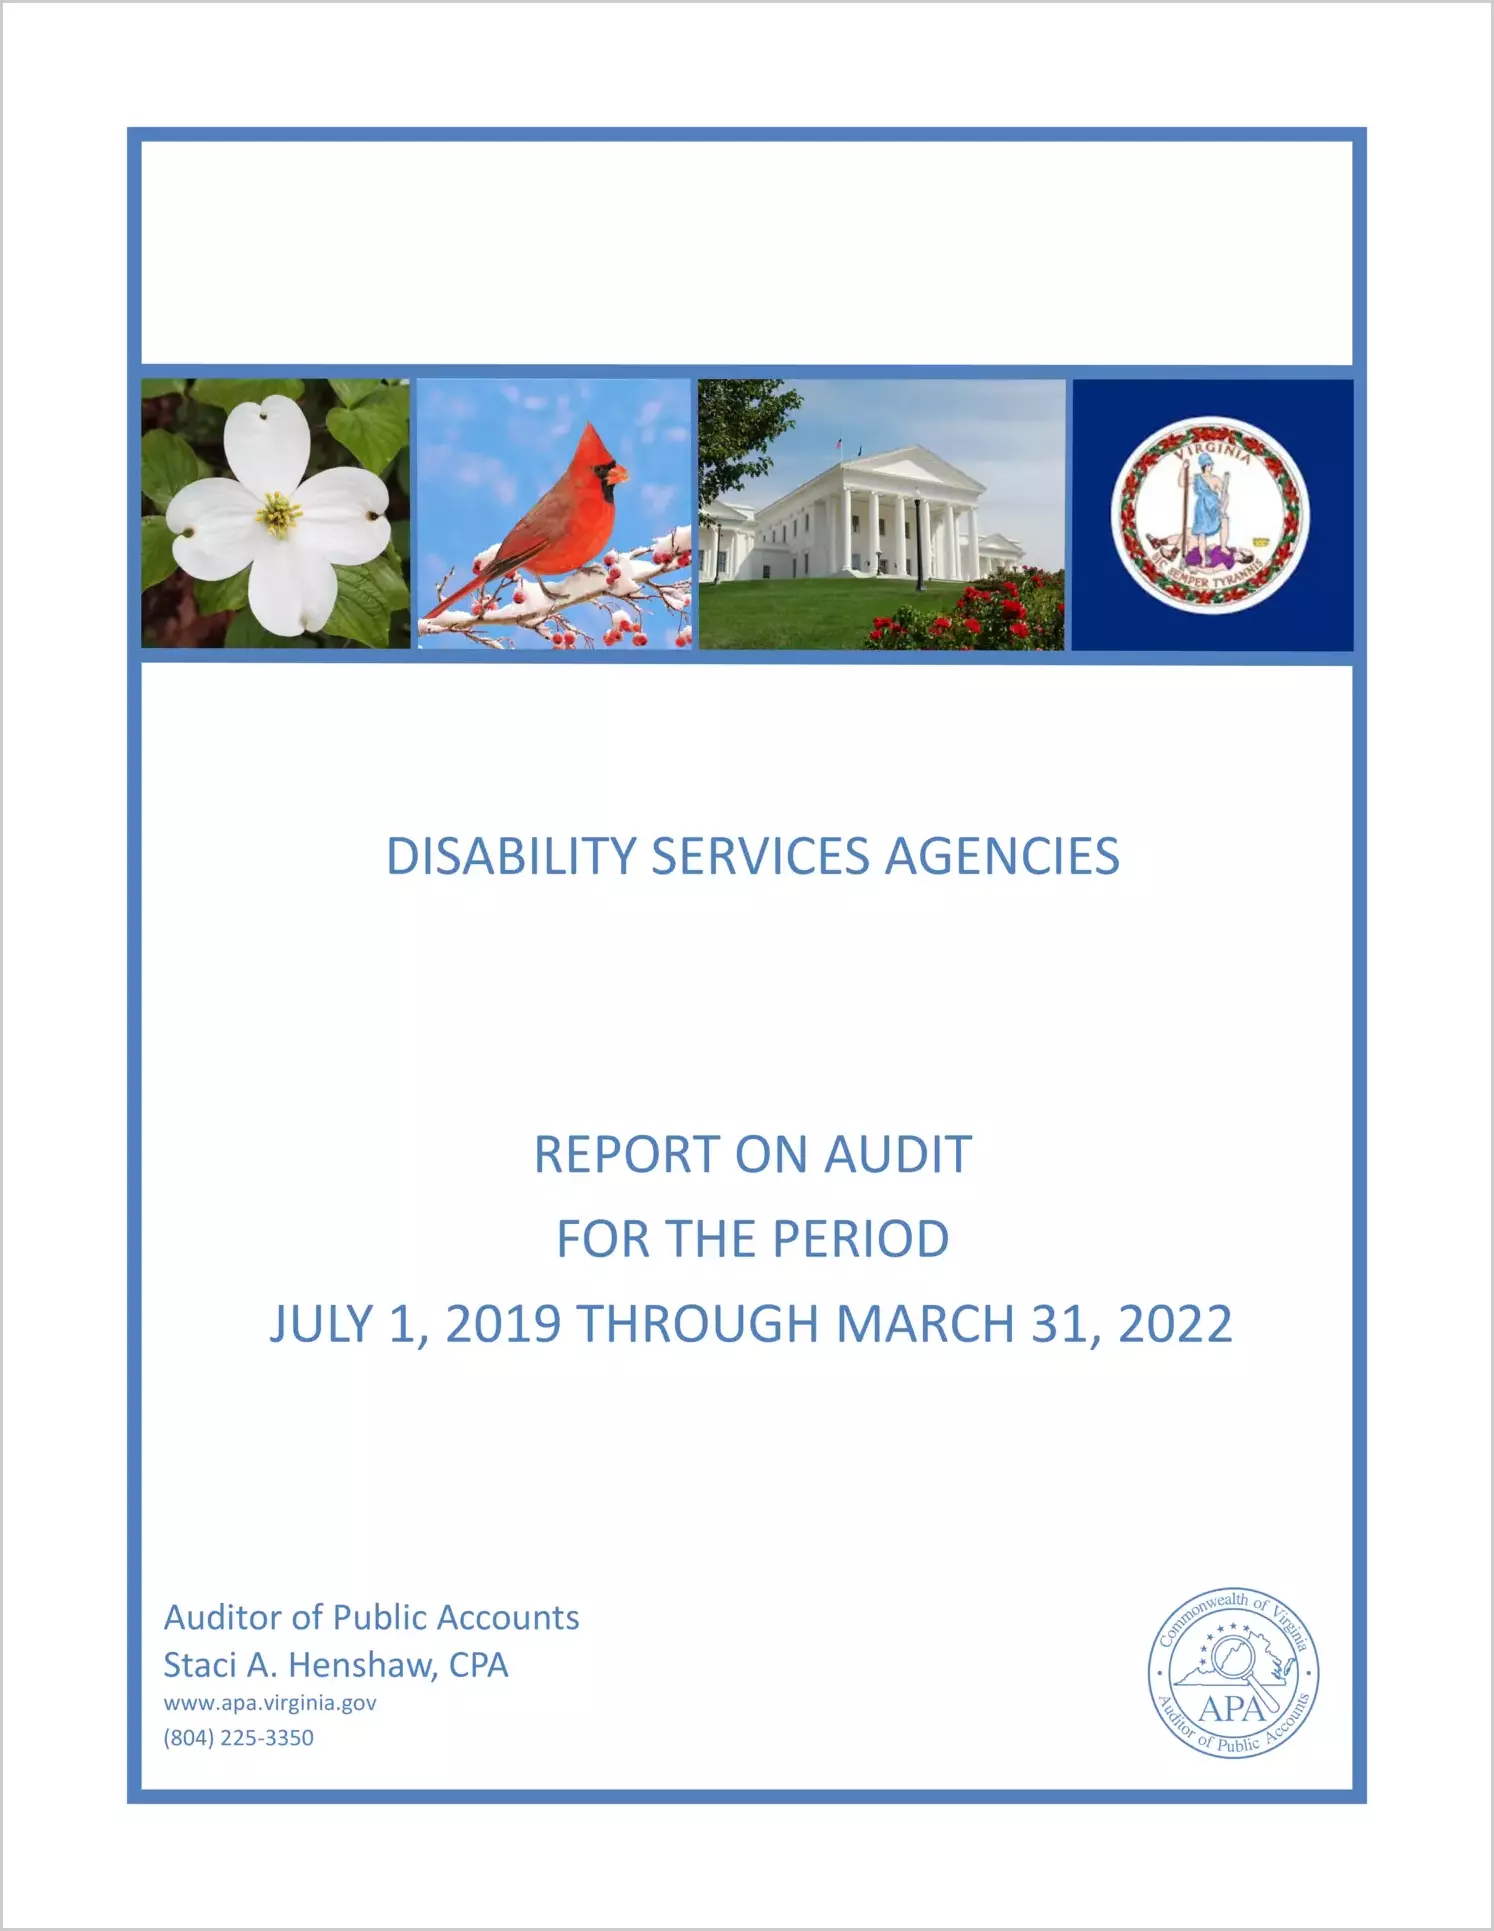 Disability Services Agencies for the period July 1, 2019 through March 31, 2022